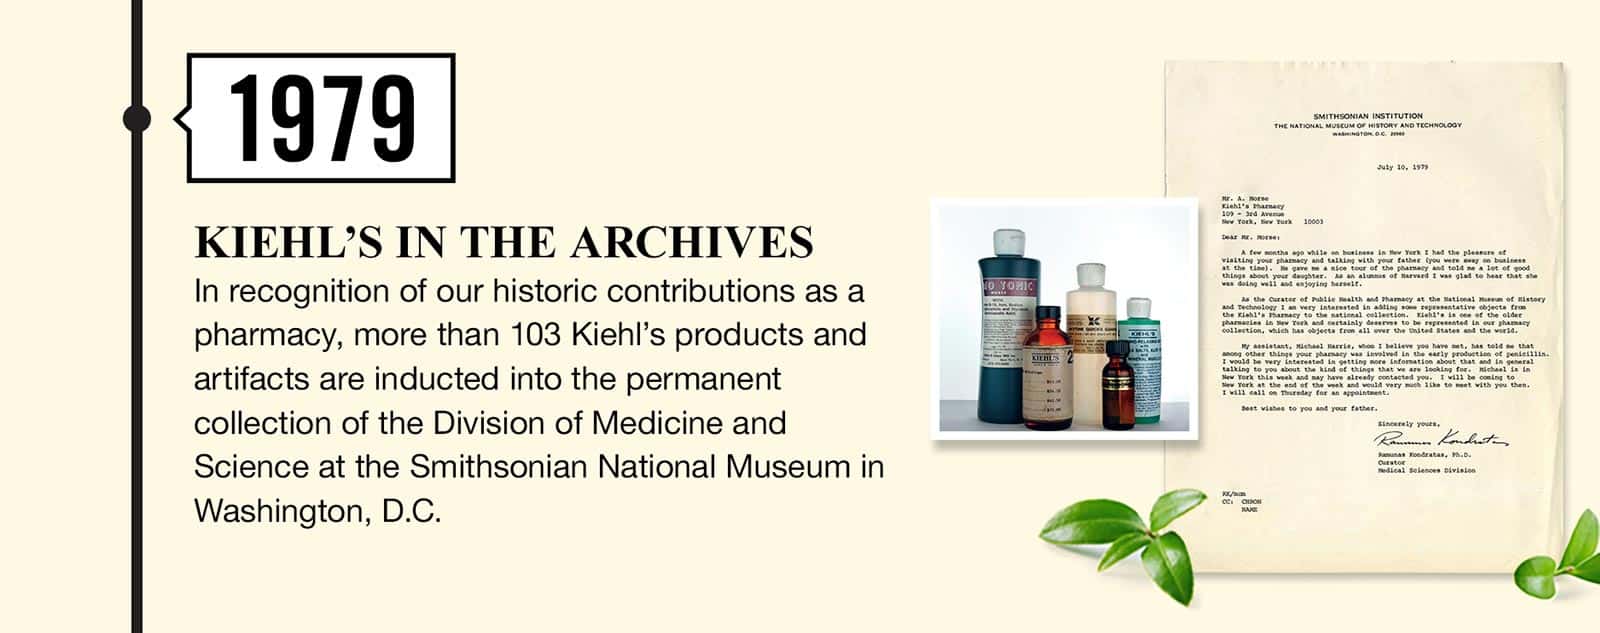 Kiehl's history in the year 1979